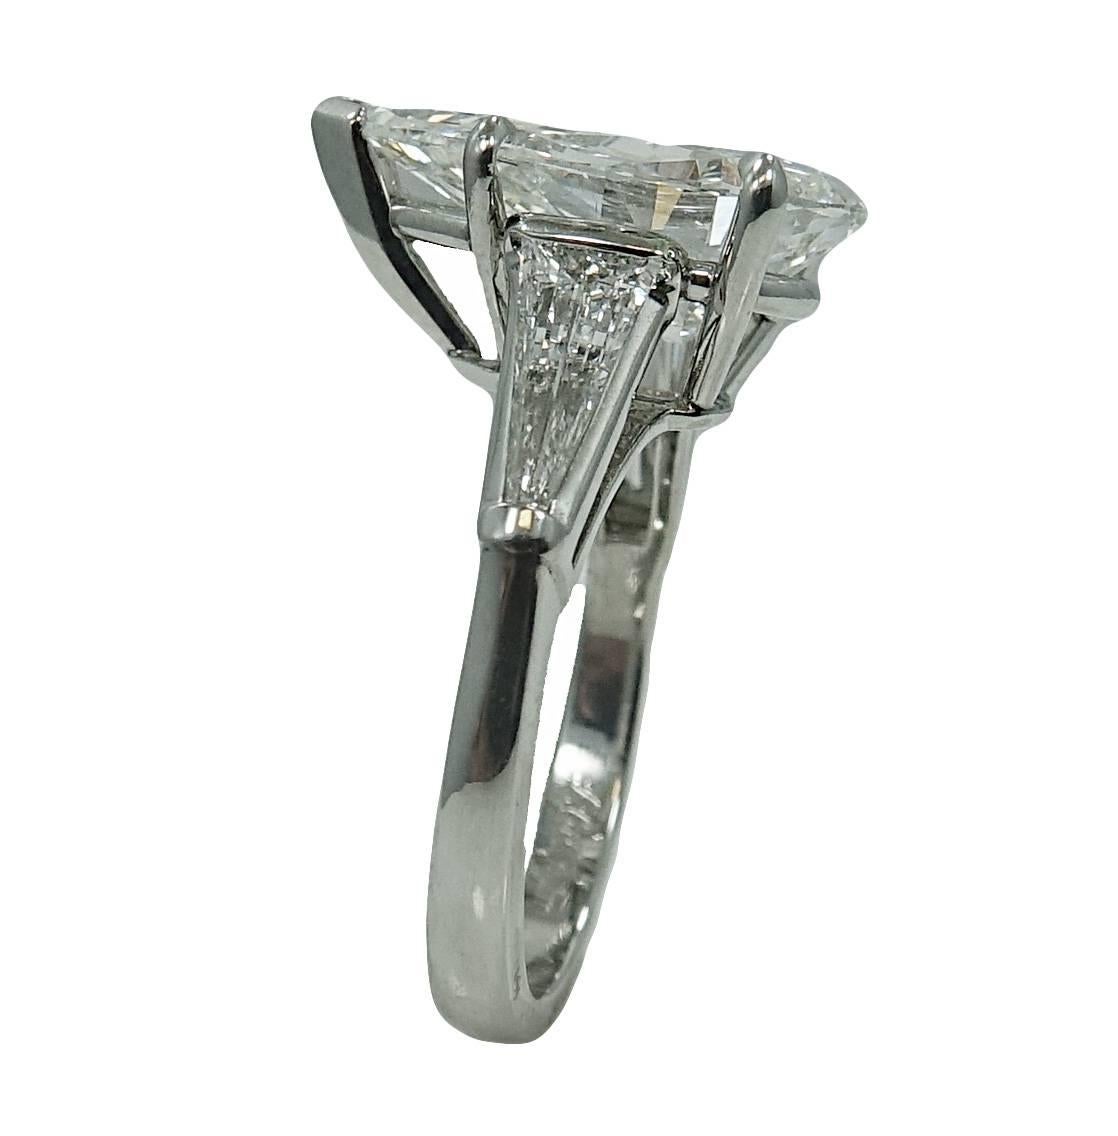 Platinum Ring With Center Pear Shape Diamond Weighing a Total Carat Weight Of 5.04ct J in COlor and VS2 Clarity (GIA Report #: 2181053087) and Two Side Baguette Diamonds Weighing a Total Carat Weight of 0.70ct H in Color and VS in Clarity. This Ring